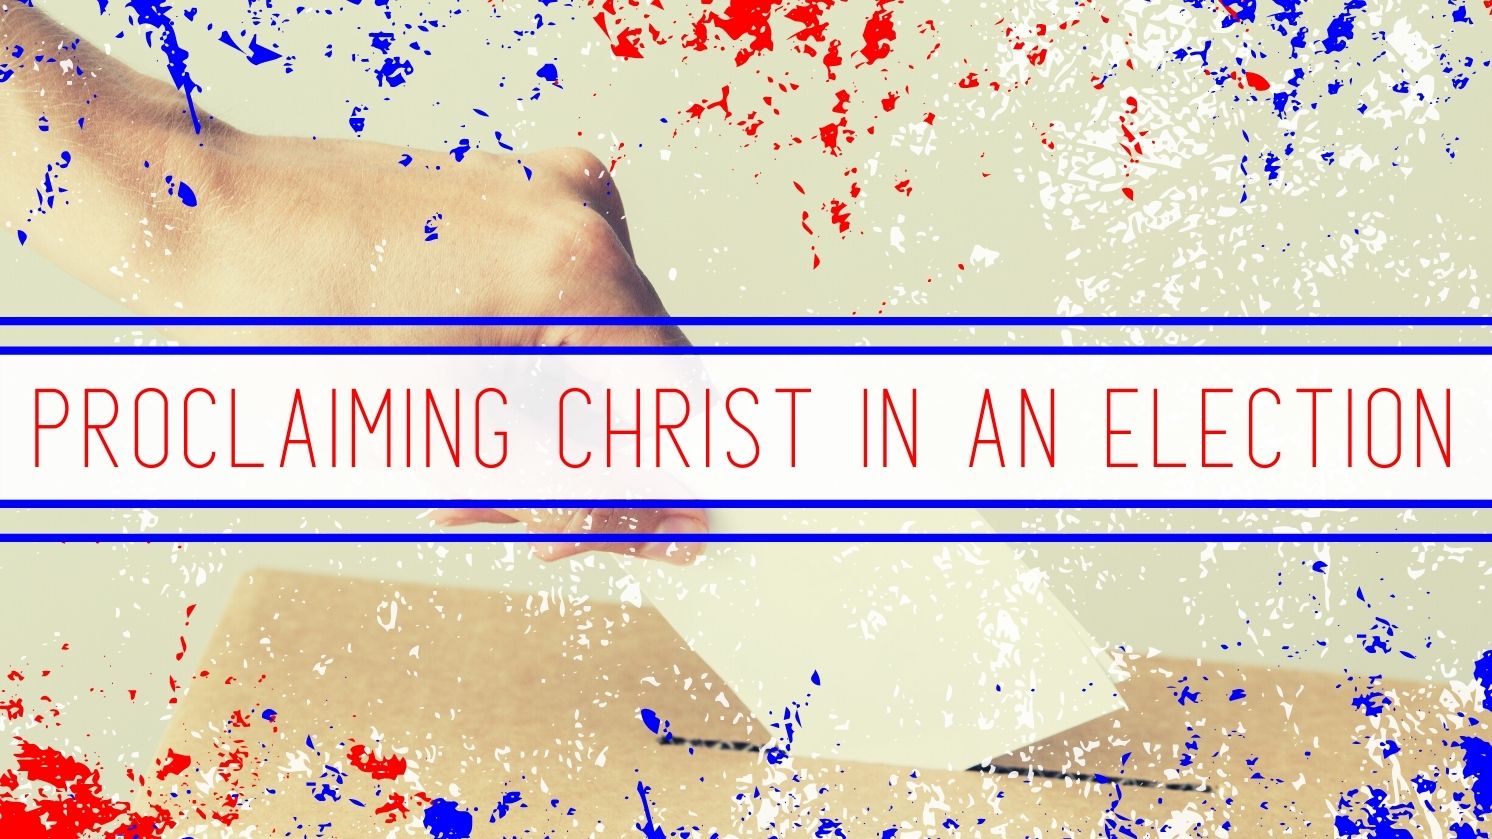 Proclaiming Christ in an Election